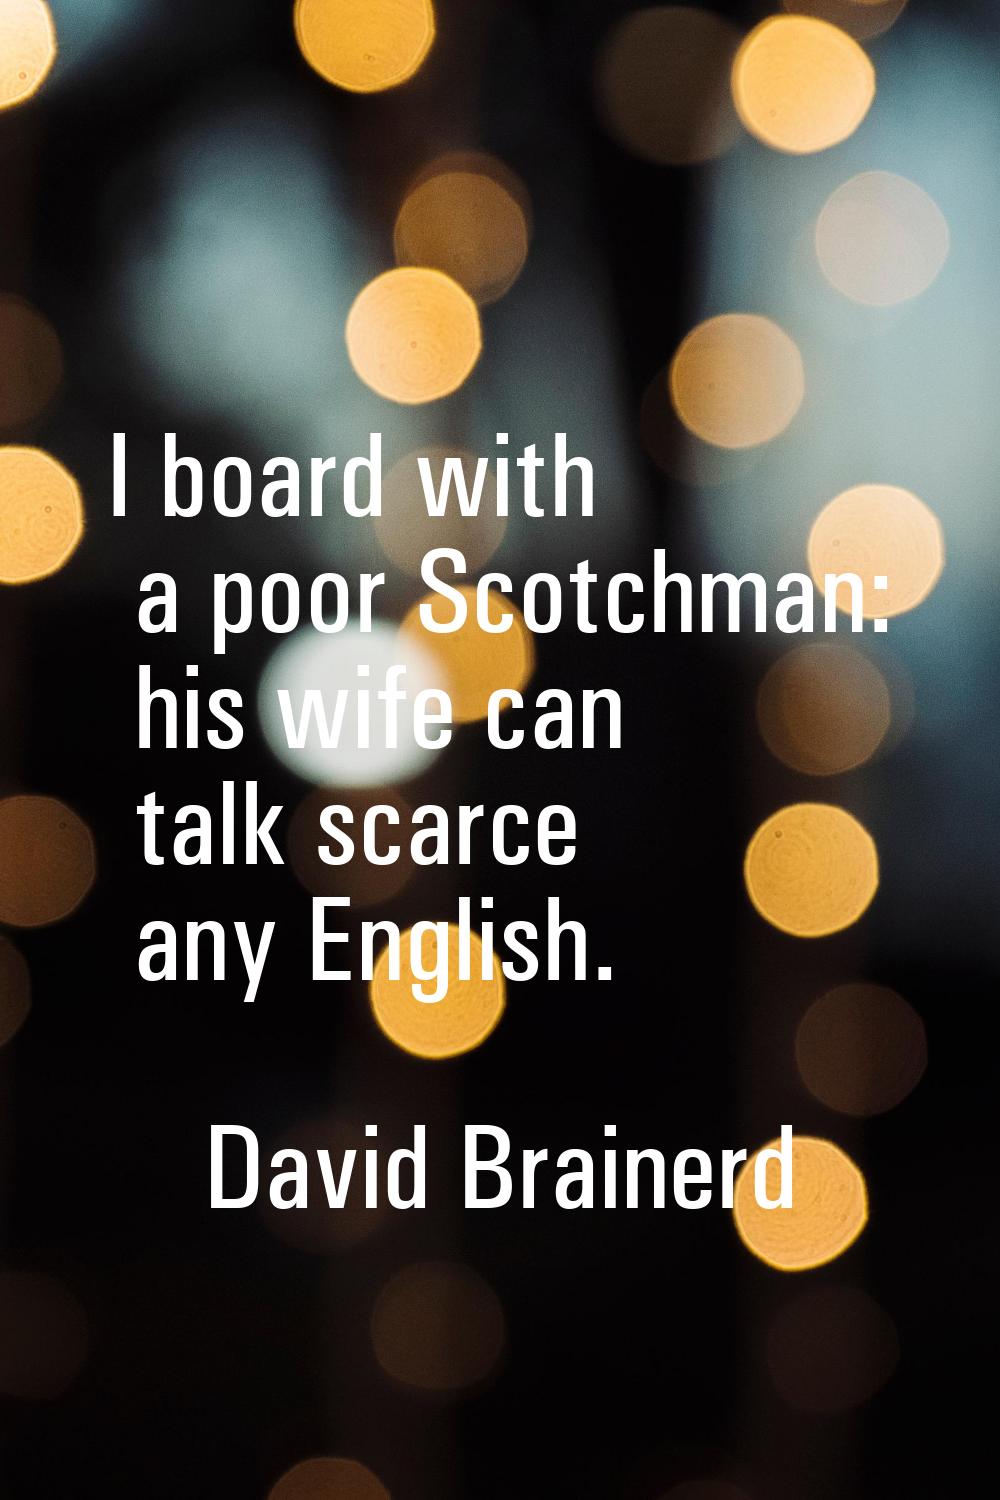 I board with a poor Scotchman: his wife can talk scarce any English.